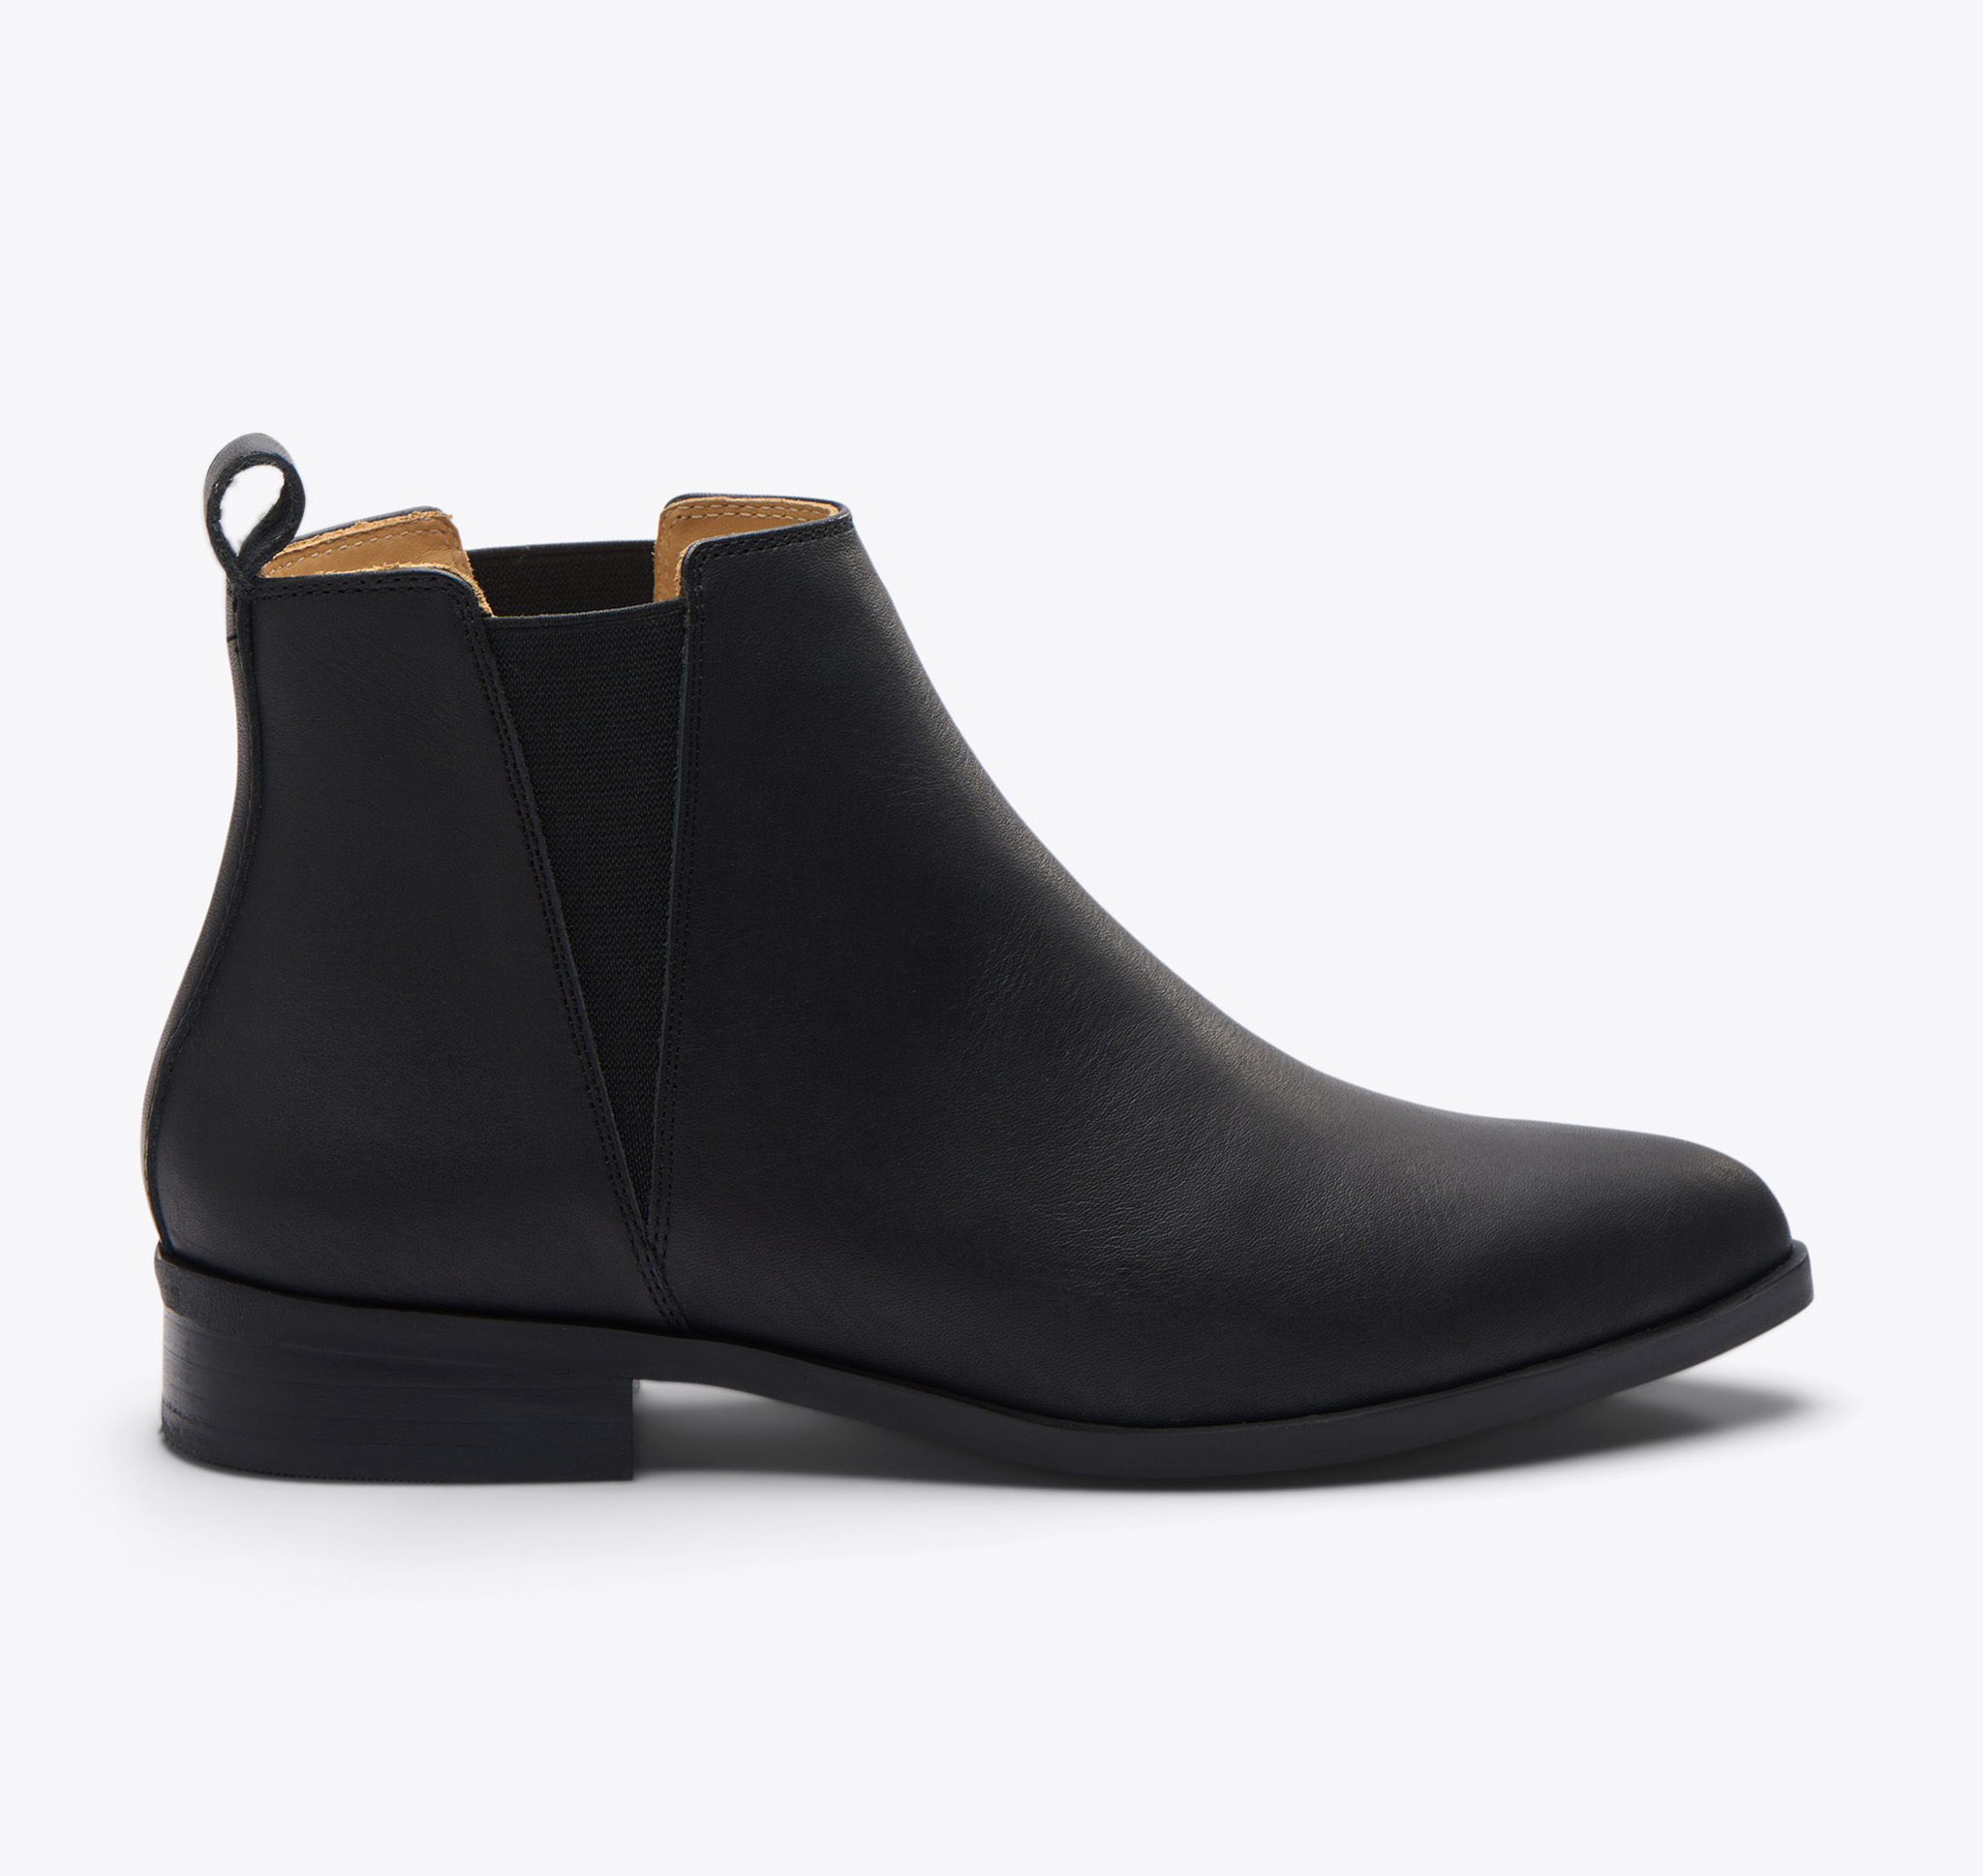 Nisolo Everyday Chelsea Commuter Boot Black - Every Nisolo product is built on the foundation of comfort, function, and design. 